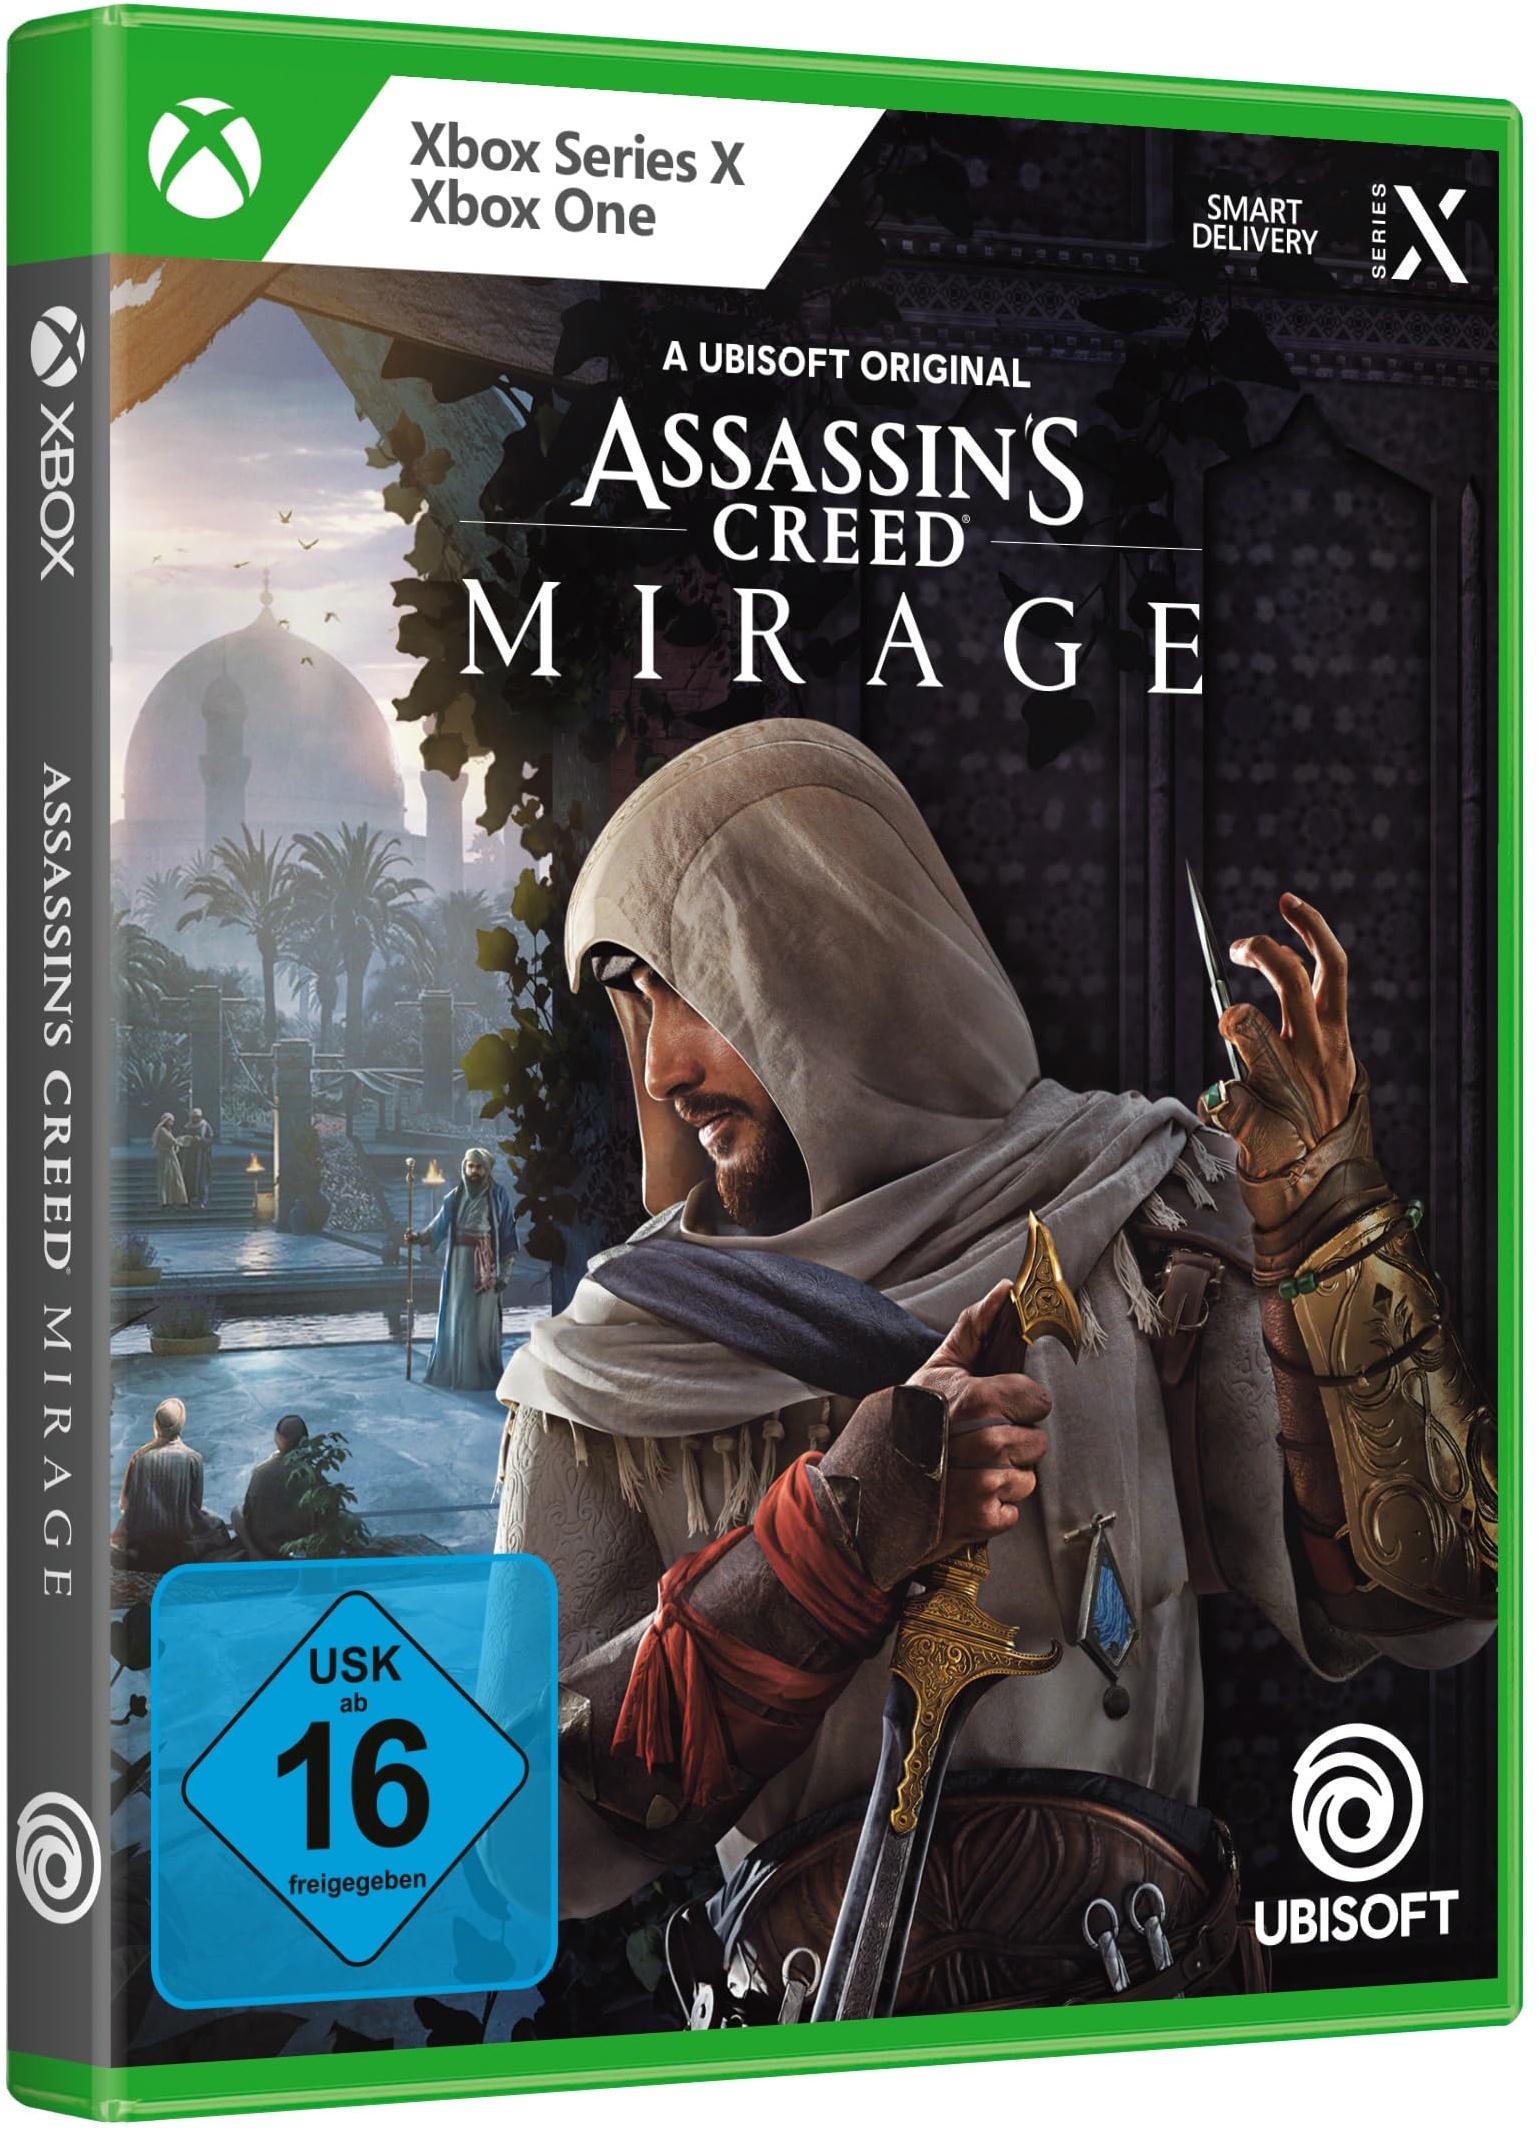 Assassin's Creed Mirage [Xbox One, Xbox Series X] - Uncut